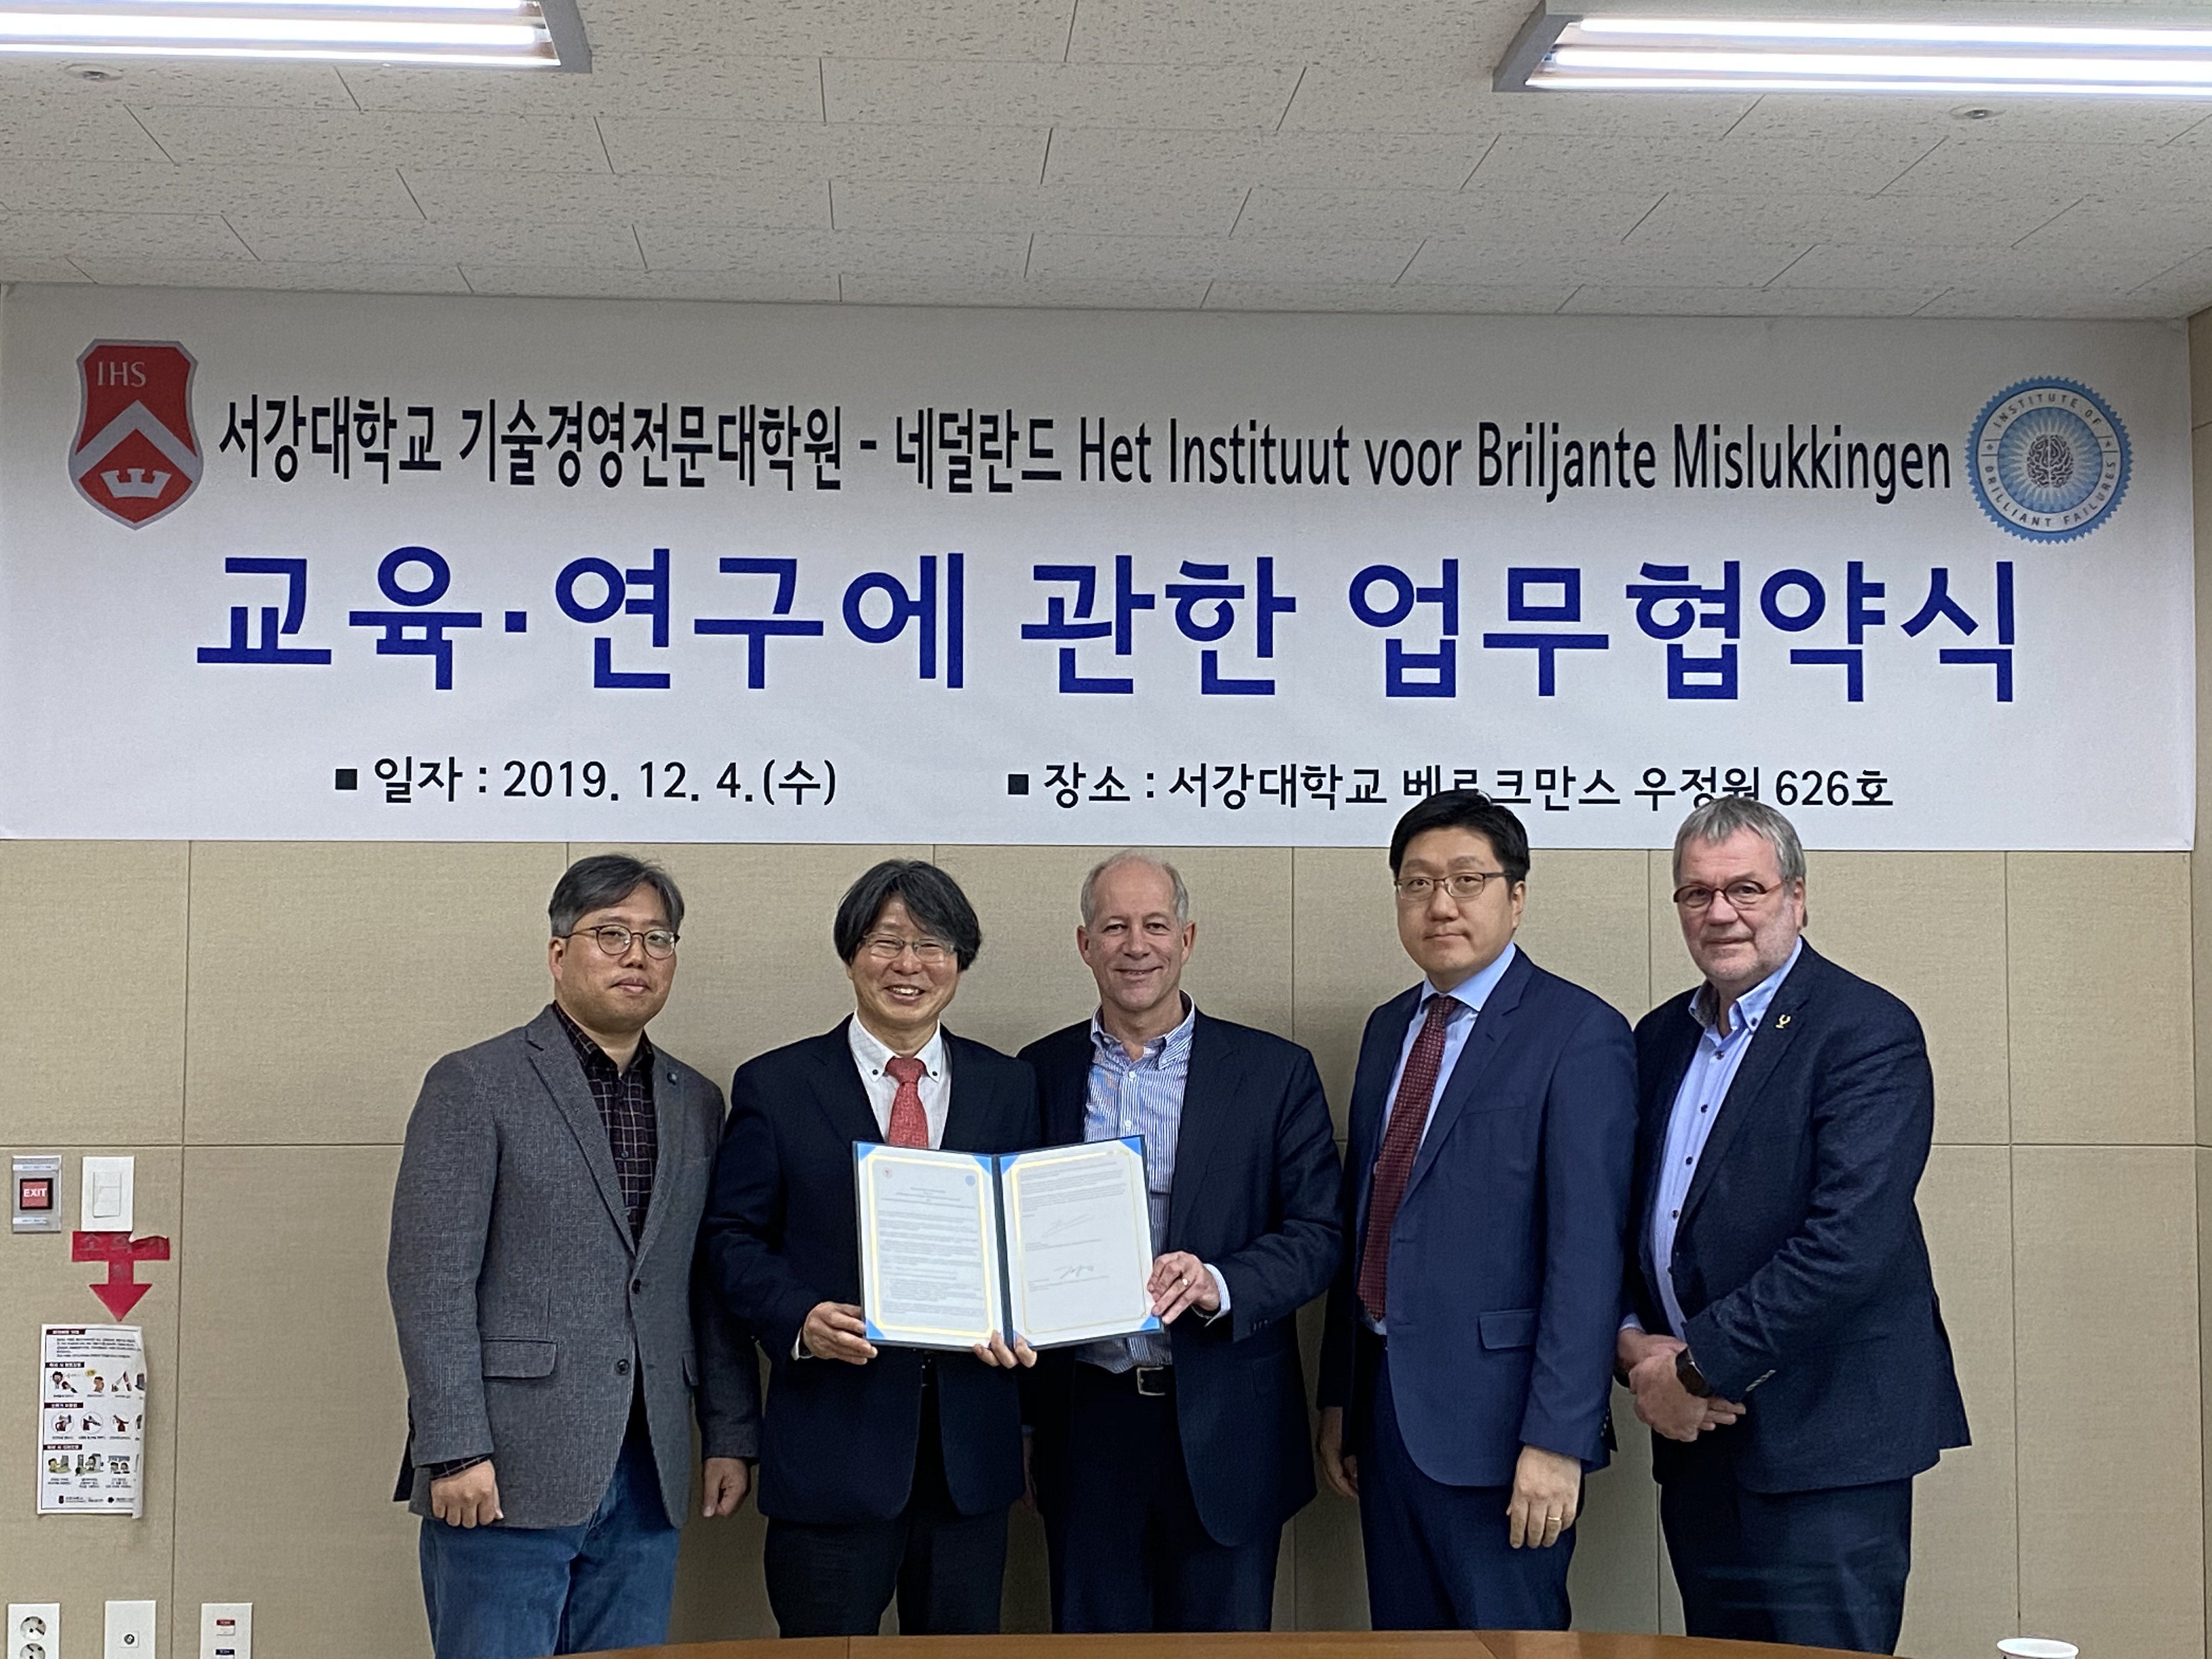 Professor Jung Yoo Shin,  Dean of Sogang Graduate School of Master of Technology, Seoul and Prof. Paul Louis Iske, Chief Failure of the Institute of Brilliant Failures, Amsterdam, signed a Memorandum of Understanding.